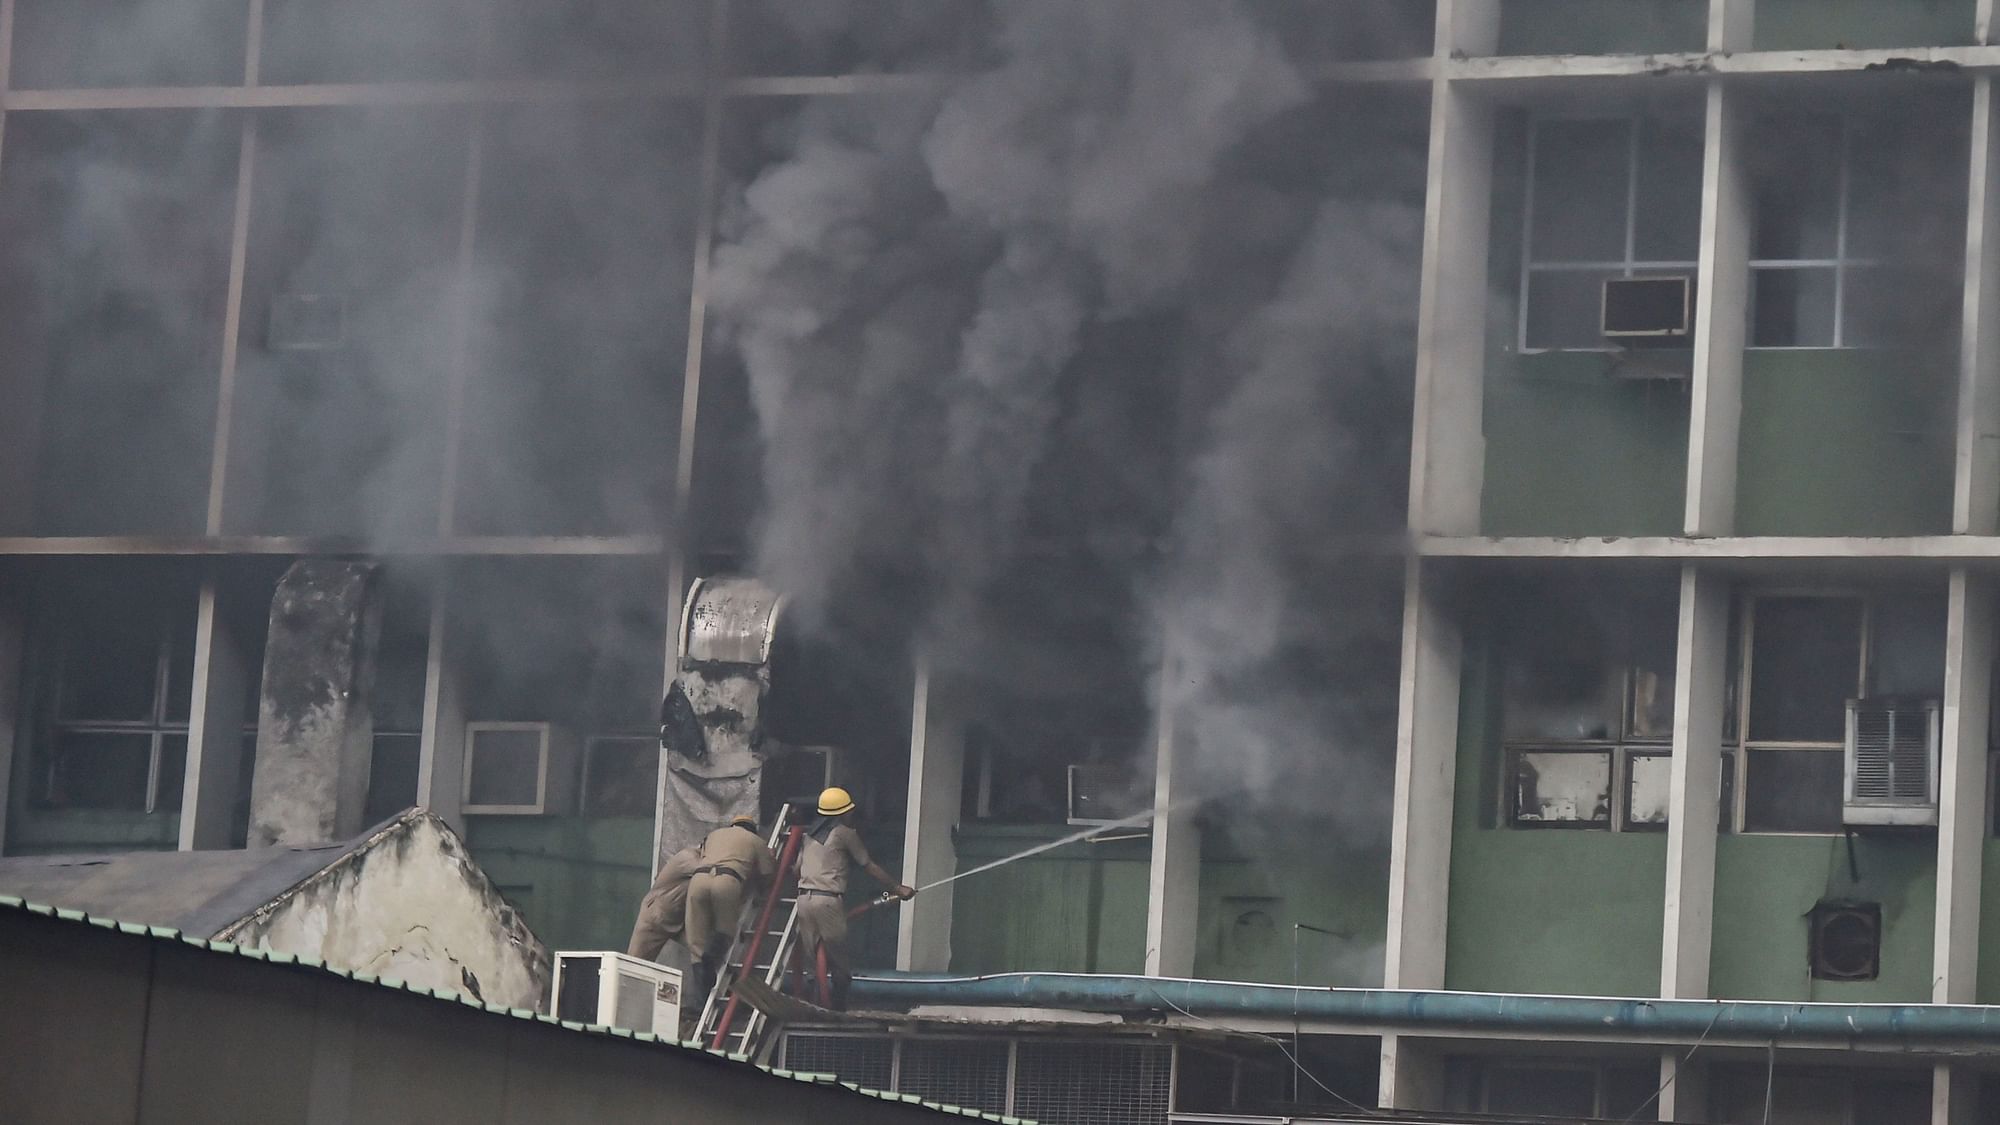  A massive fire broke out at the All India Institute of Medical Sciences – or AIIMS – in Delhi on Saturday evening.&nbsp;